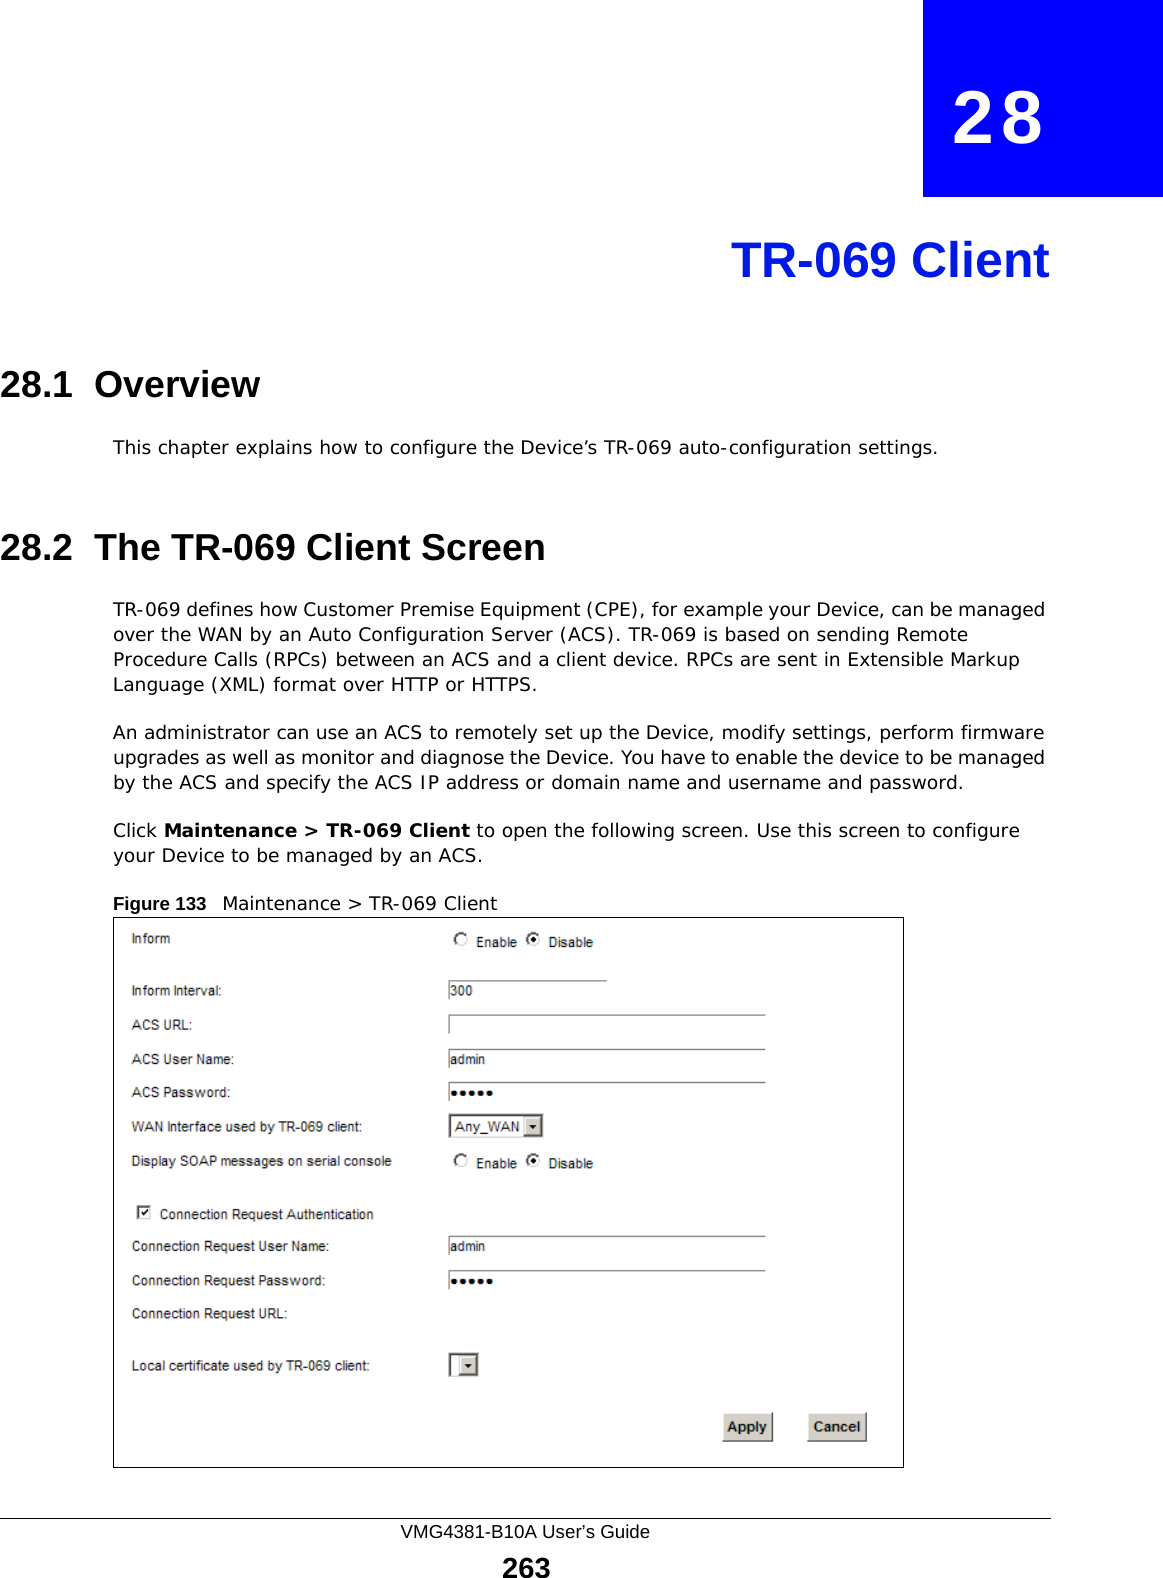 VMG4381-B10A User’s Guide263CHAPTER   28TR-069 Client28.1  OverviewThis chapter explains how to configure the Device’s TR-069 auto-configuration settings.28.2  The TR-069 Client ScreenTR-069 defines how Customer Premise Equipment (CPE), for example your Device, can be managed over the WAN by an Auto Configuration Server (ACS). TR-069 is based on sending Remote Procedure Calls (RPCs) between an ACS and a client device. RPCs are sent in Extensible Markup Language (XML) format over HTTP or HTTPS. An administrator can use an ACS to remotely set up the Device, modify settings, perform firmware upgrades as well as monitor and diagnose the Device. You have to enable the device to be managed by the ACS and specify the ACS IP address or domain name and username and password.Click Maintenance &gt; TR-069 Client to open the following screen. Use this screen to configure your Device to be managed by an ACS. Figure 133   Maintenance &gt; TR-069 Client 